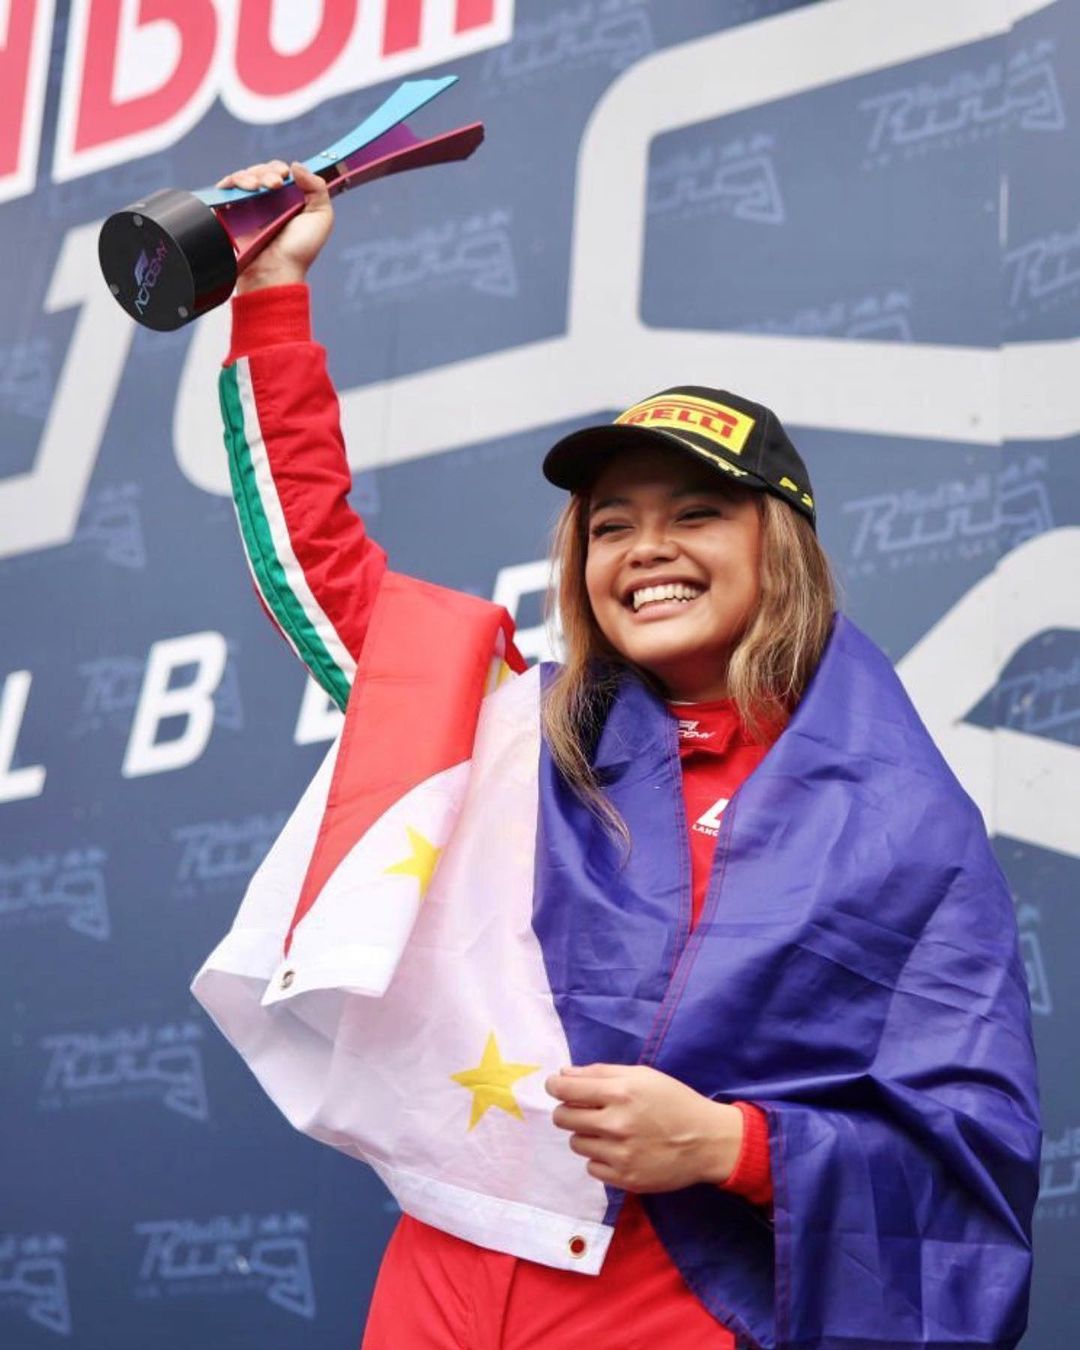 Bianca Bustamante taking her first podium finish in F1 Academy in the Red Bull Ring in Austria  